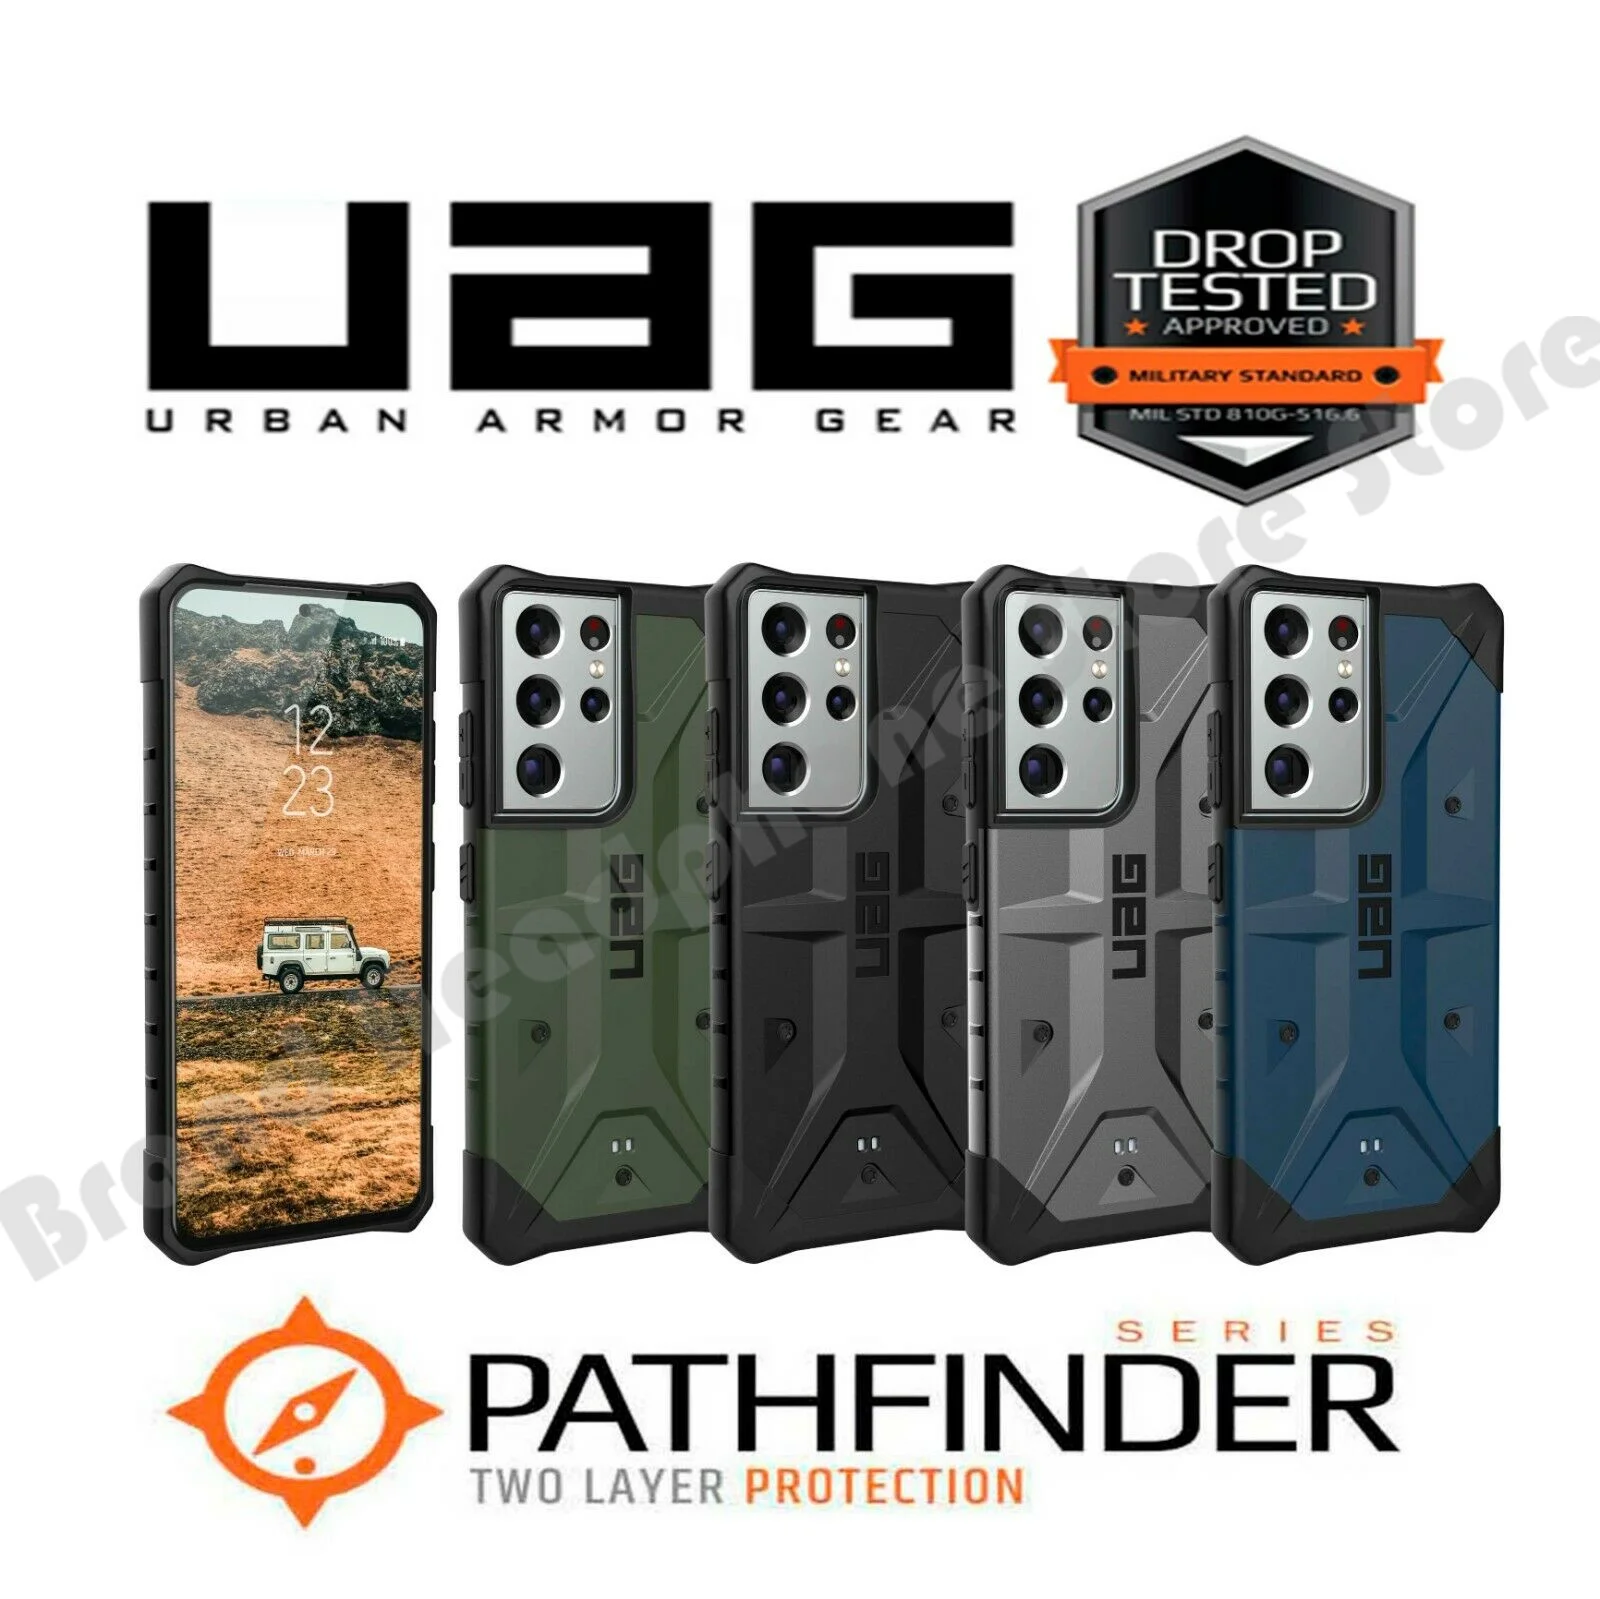 

UAG Urban Armor Gear Pathfinder Samsung Galaxy S21 Ultra Rugged Case Protective Cover Case Shockproof for Galaxy S21 Plus + S21